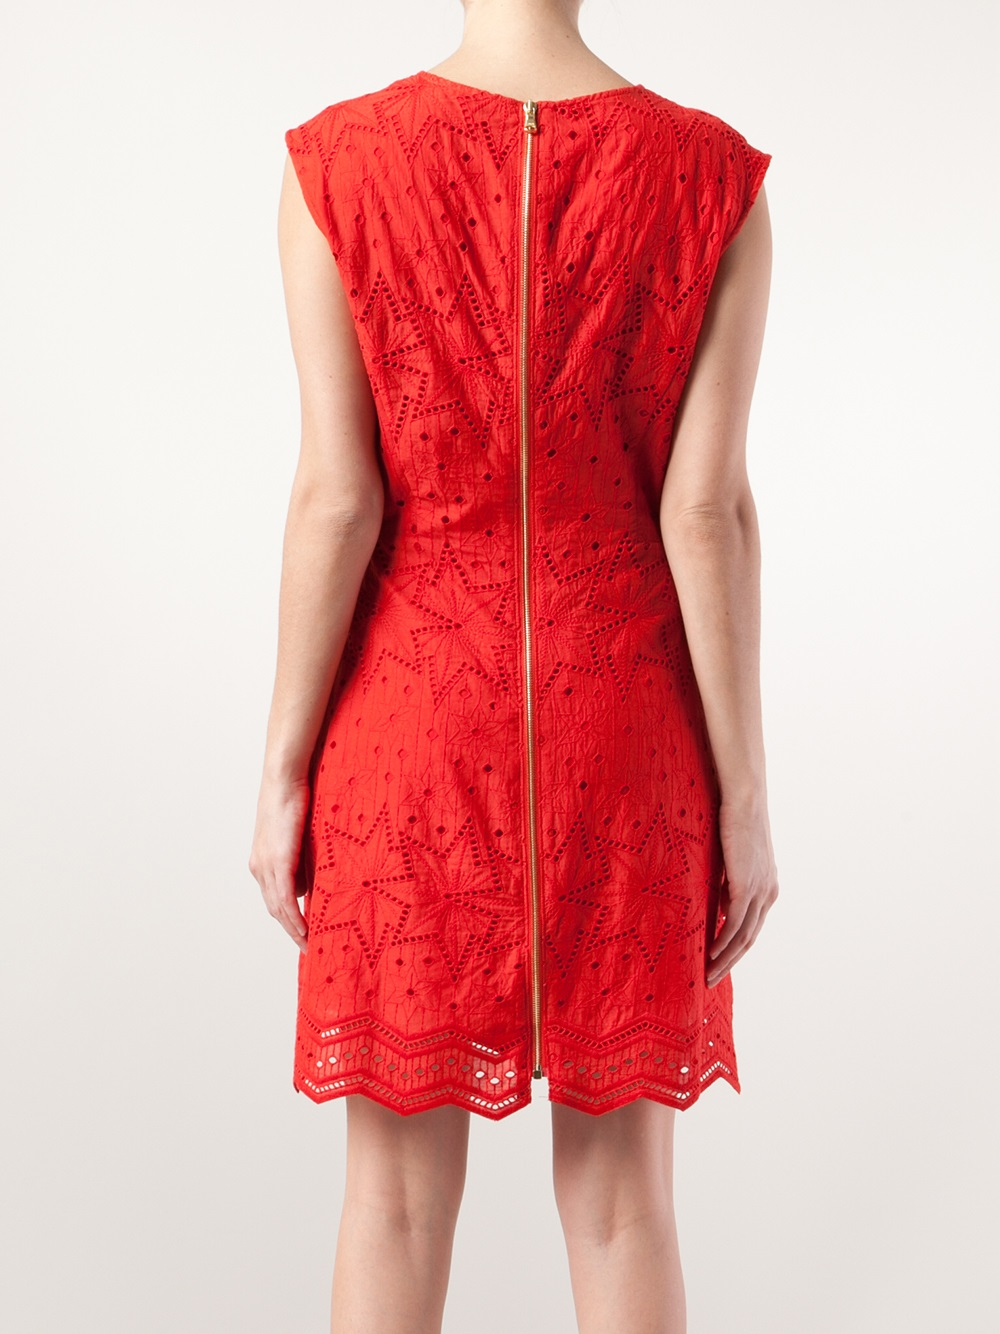 Lyst - Veronica Beard Sleeveless Star Lace Dress in Red